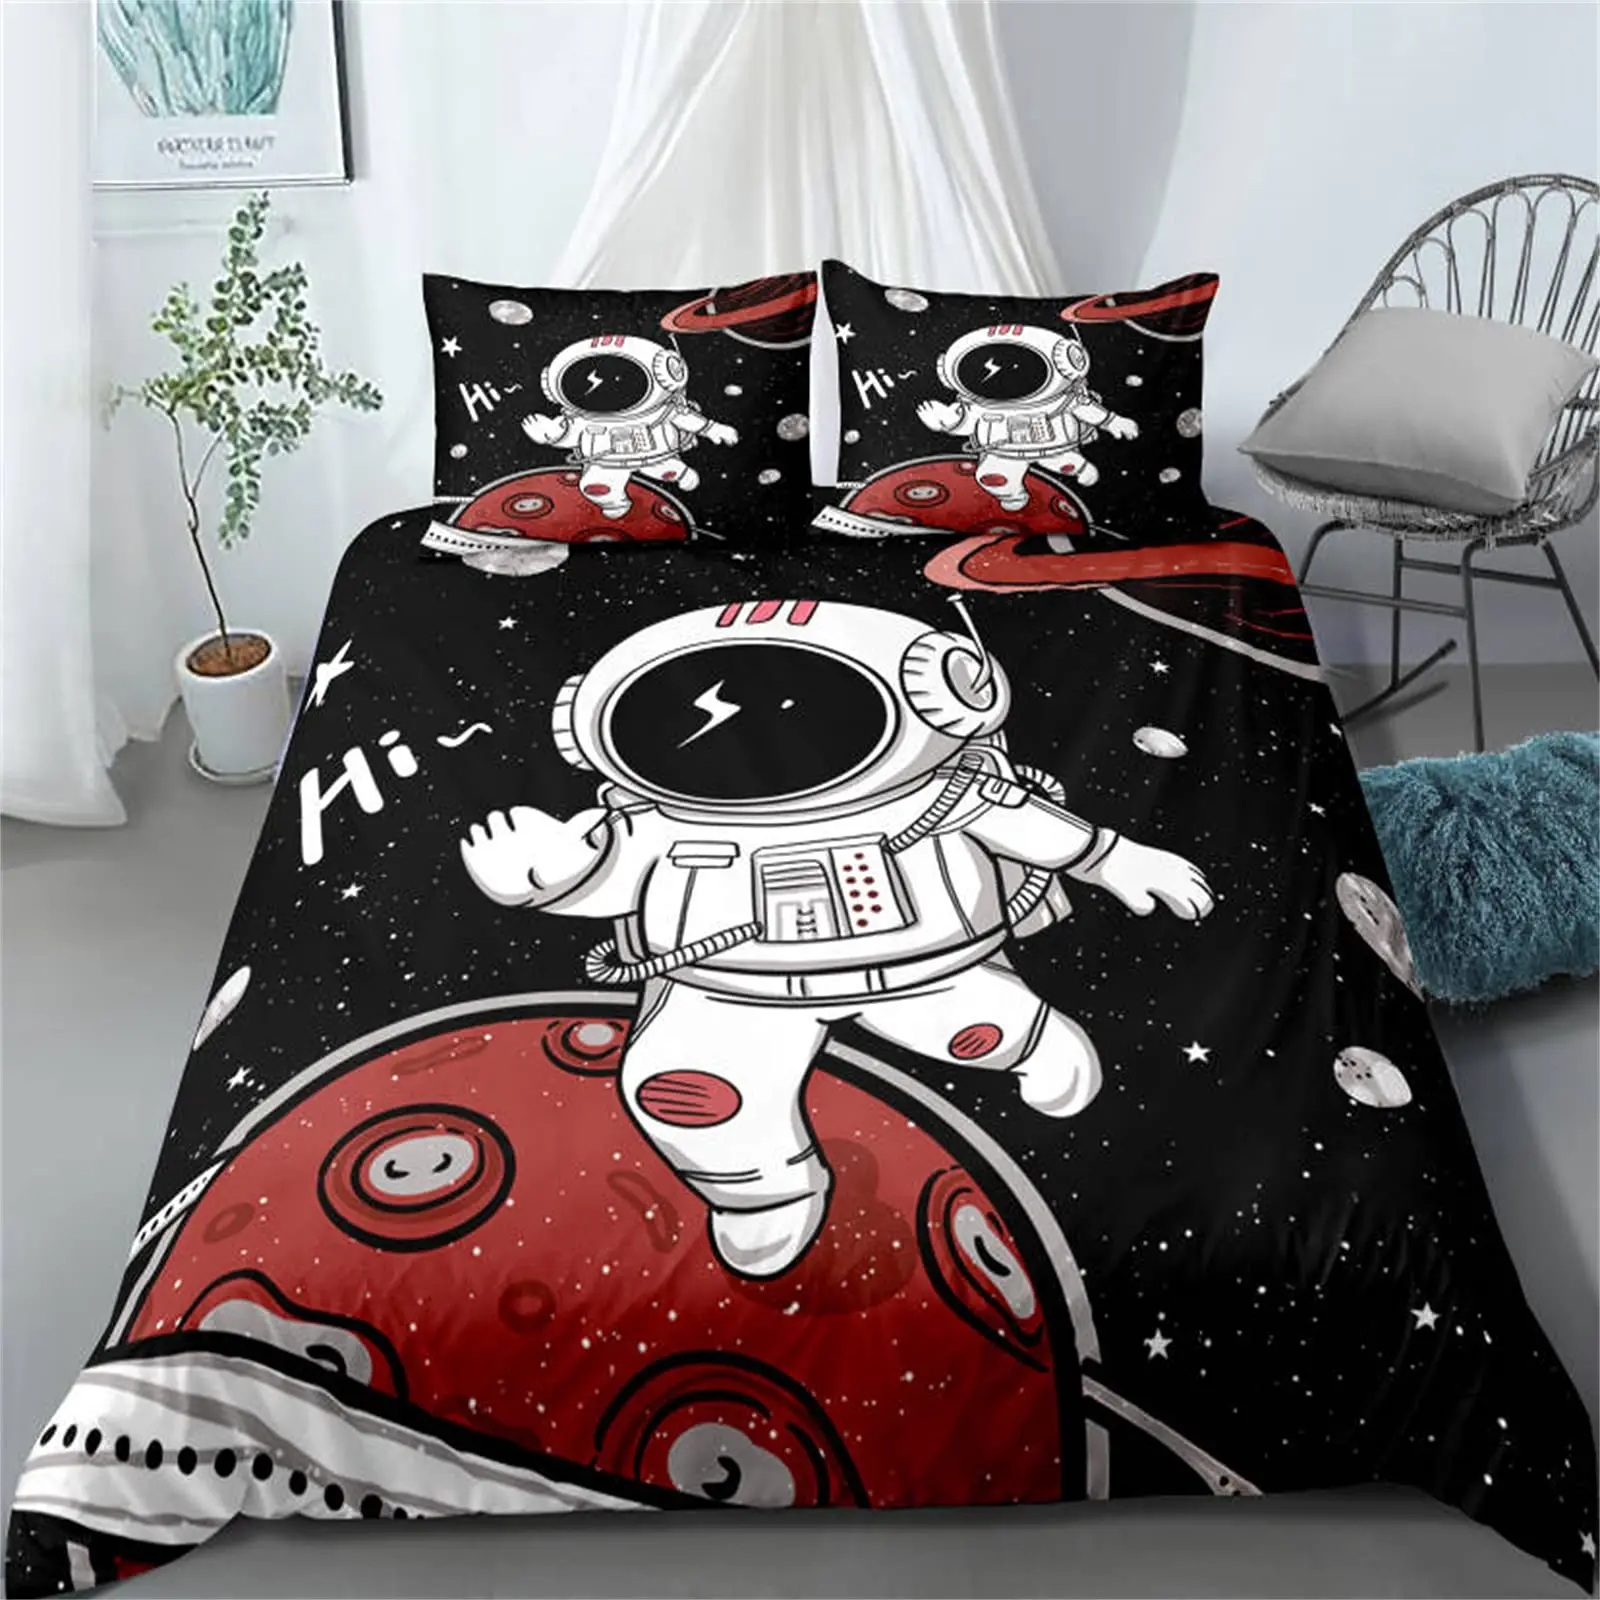 Astronaut duvet cover with pillowcase for children kids bed decor queen king size space thumb200